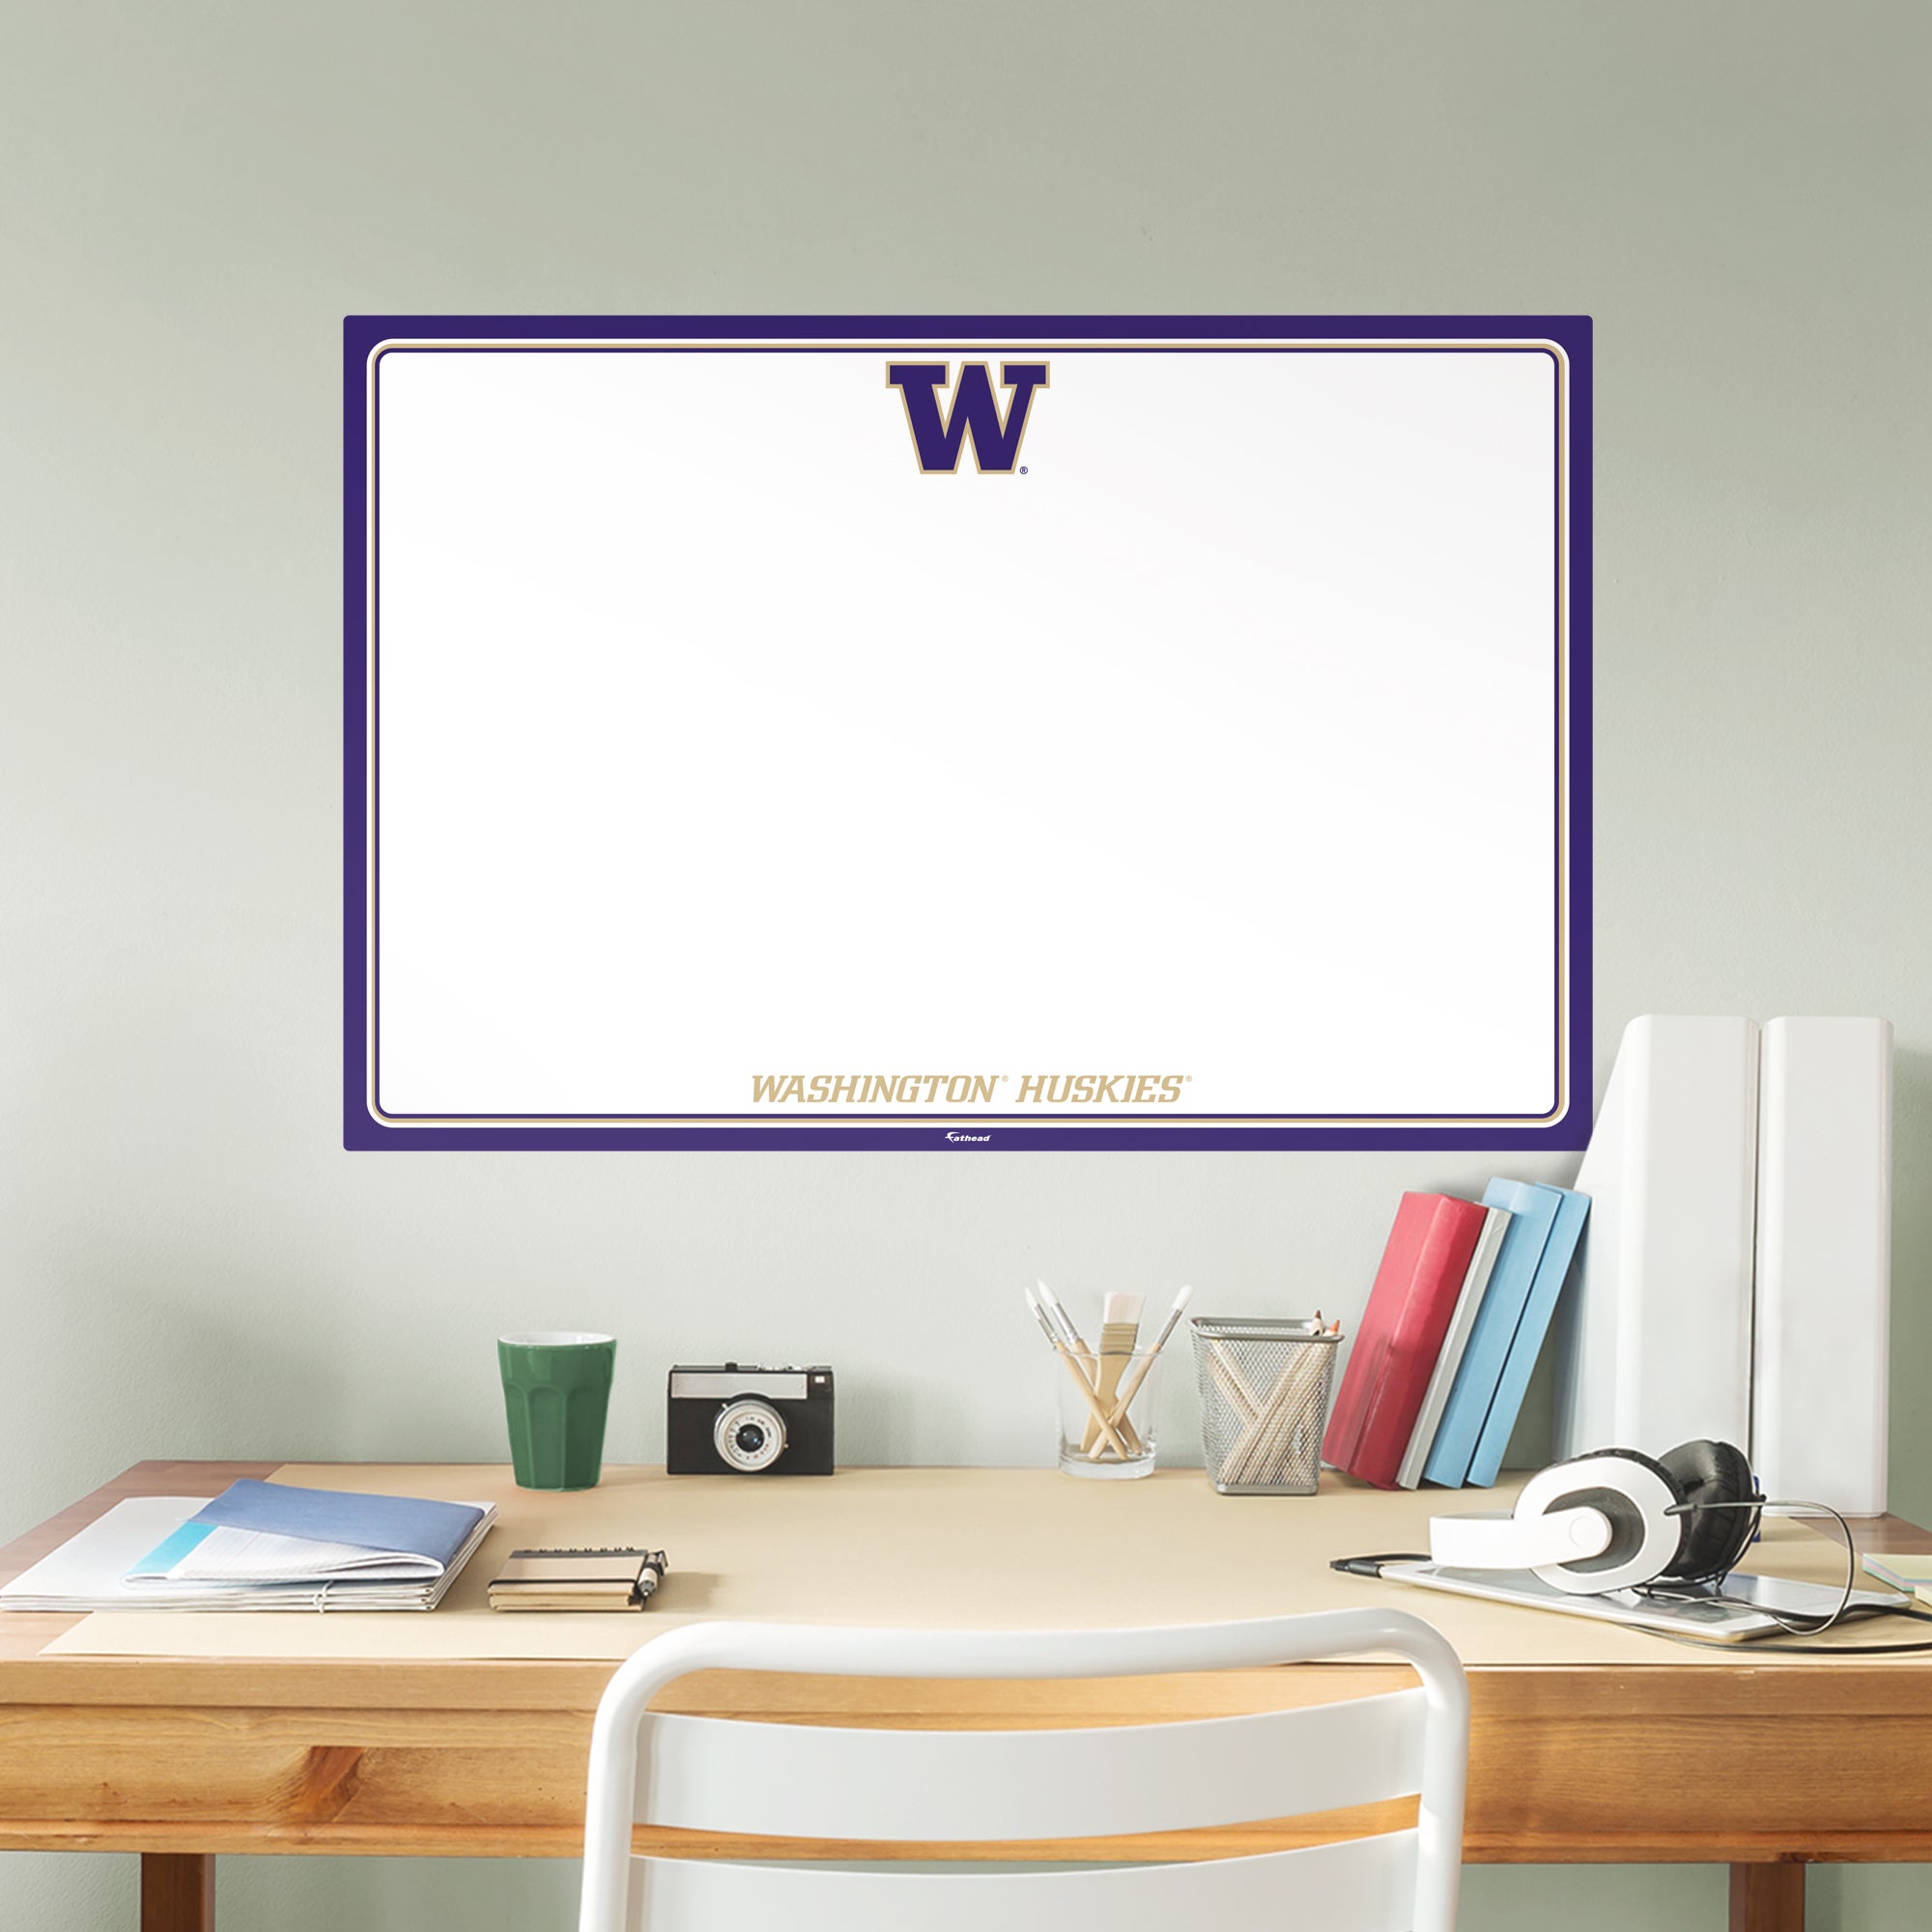 Washington Huskies: Dry Erase Whiteboard - X-Large Officially Licensed NCAA Removable Wall Decal XL by Fathead | Vinyl